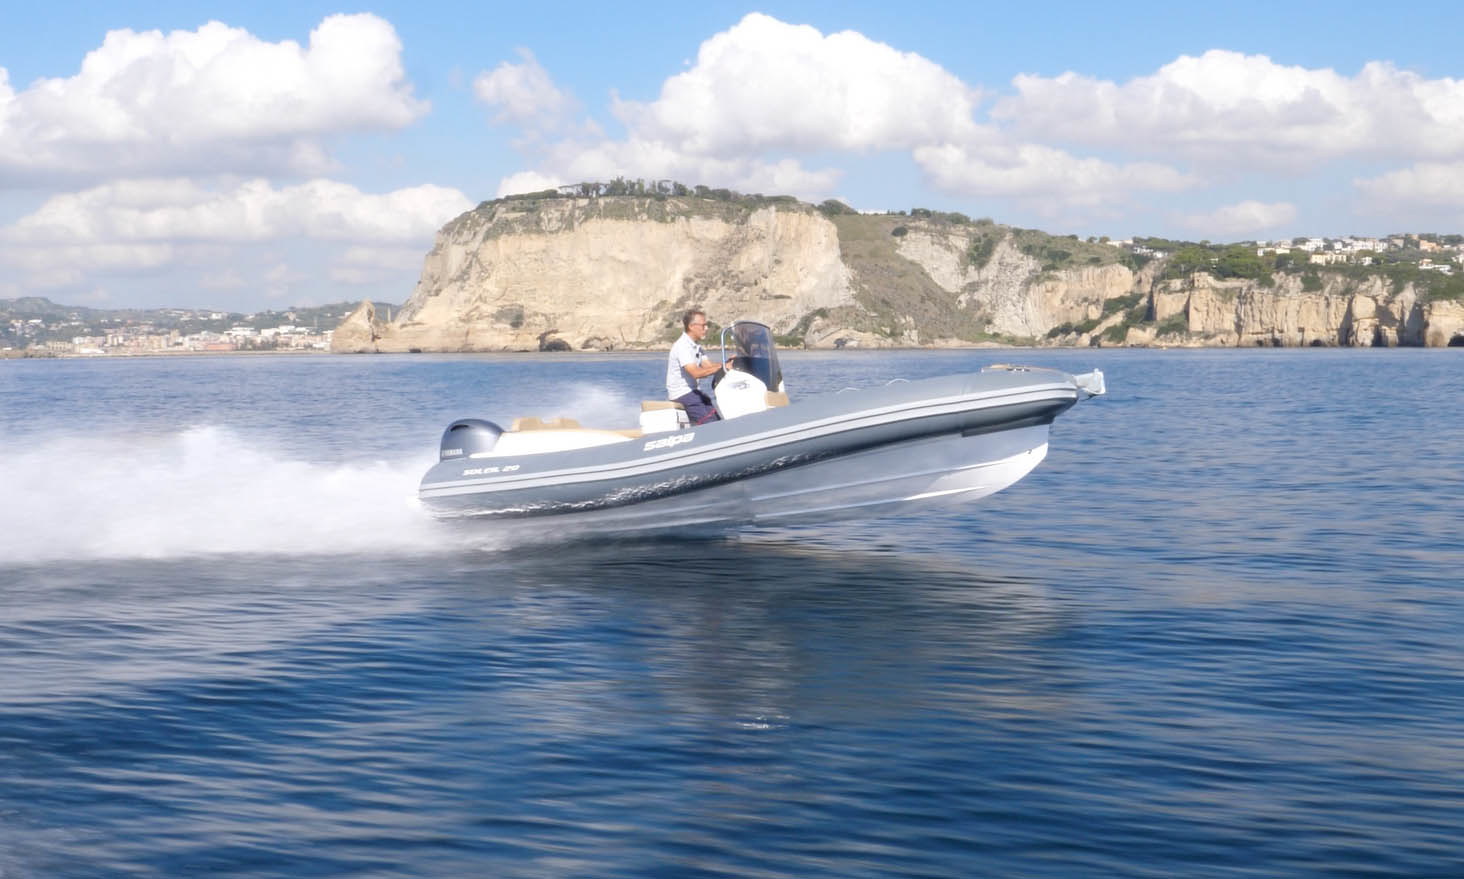 Salpa Soleil 20: Prices, Specs, Reviews and Sales Information - itBoat